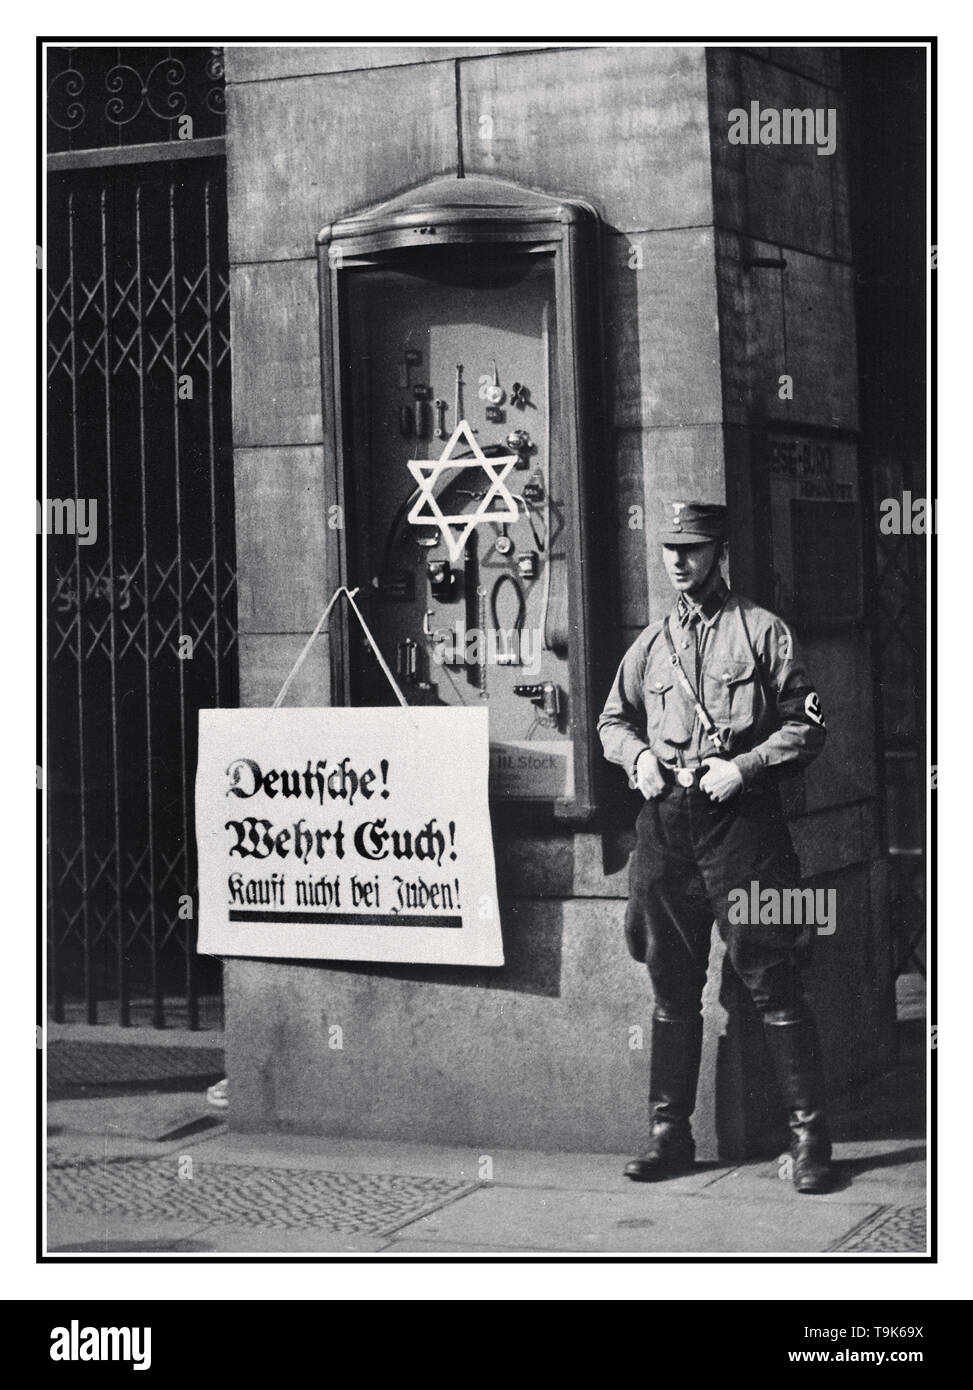 1930’s Germany Nazi boycott Jewish owned shops Vintage archive news propaganda anti-semitic image illustrating the April 1st,1933 Jewish shop store buying boycott which was announced by the Nazi NSDAP National Socialist Party. Placard reads, 'Germans, defend yourselves, do not buy from Jews', at the Jewish Tietz owned store, with Star of David stuck on a promotional cabinet. A Nazi NSDAP party member in uniform with swastika armband and wearing jackboots, stands outside to enforce the official state sponsored recommended boycott Stock Photo